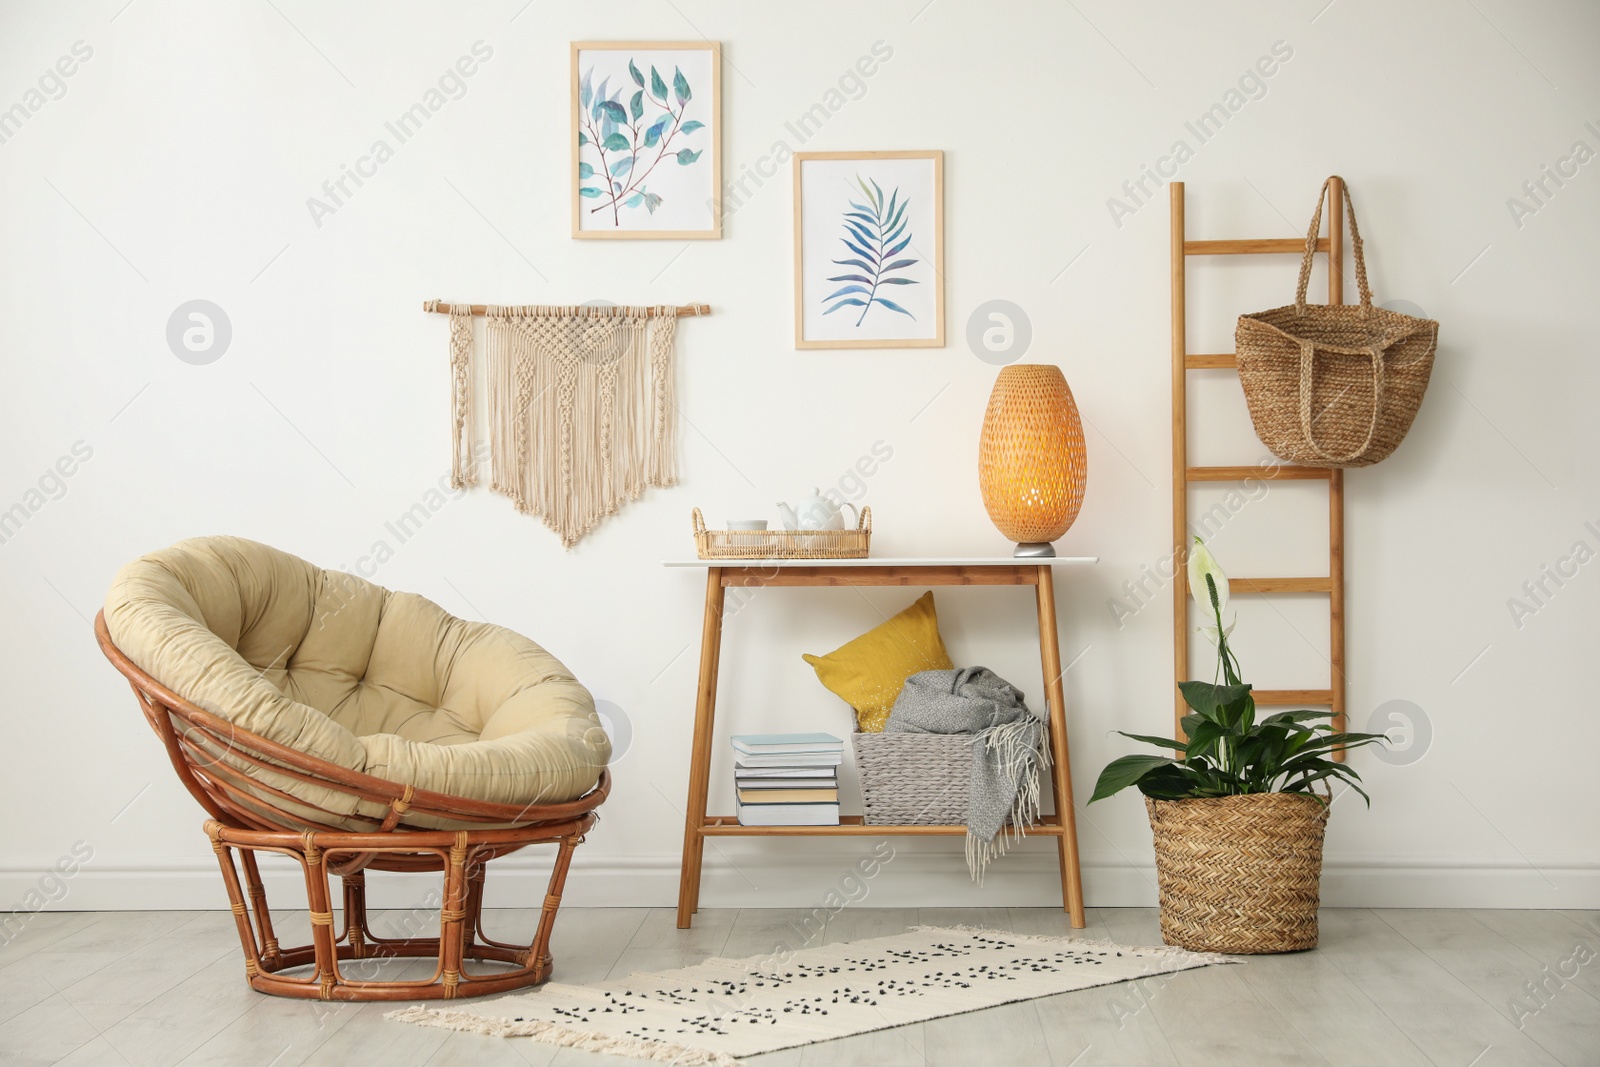 Photo of Living room interior design with comfortable papasan chair and wooden table